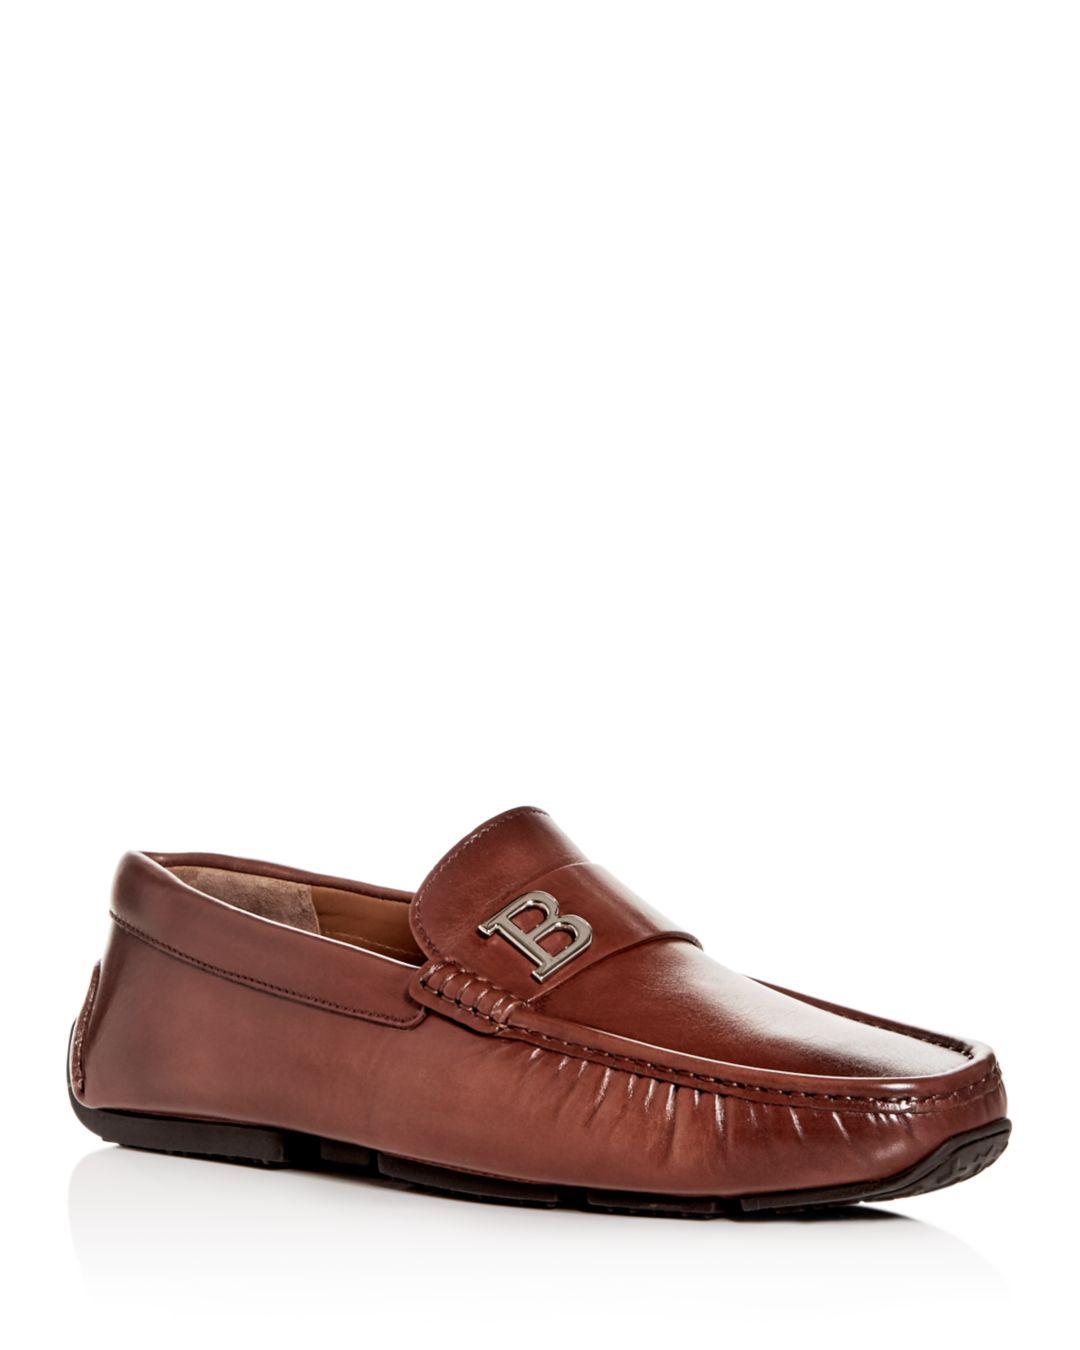 Bally Men's Pievo Leather Moc - Toe Drivers in Brown for Men - Save 29% ...